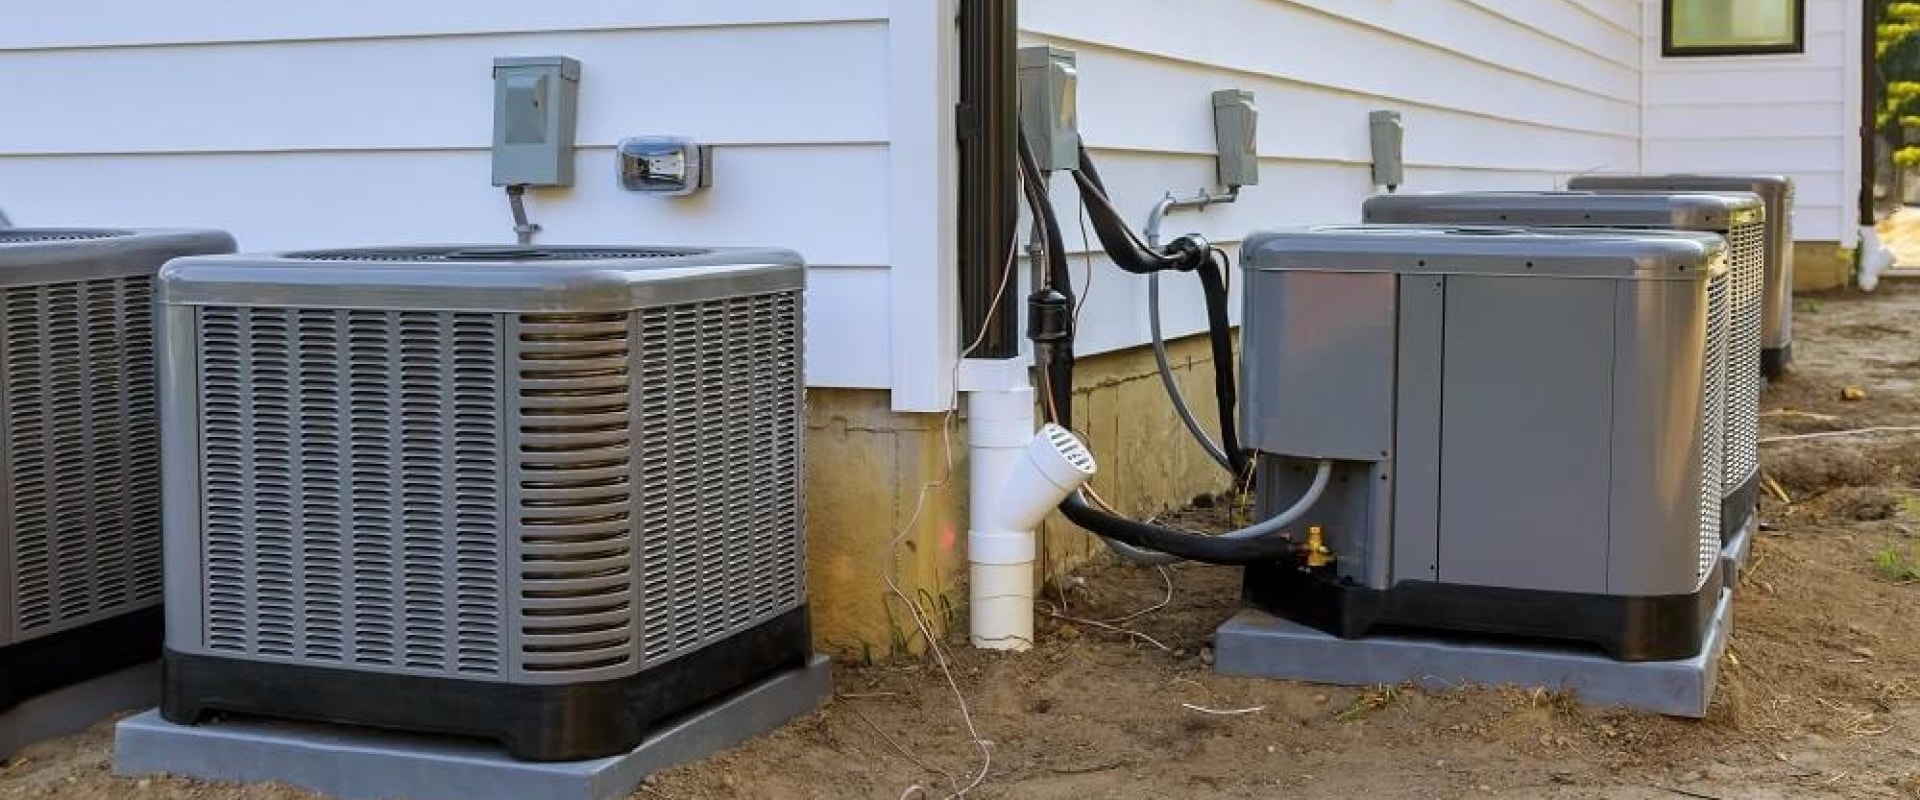 What Happens When Your AC Unit is Low on Freon? - A Comprehensive Guide